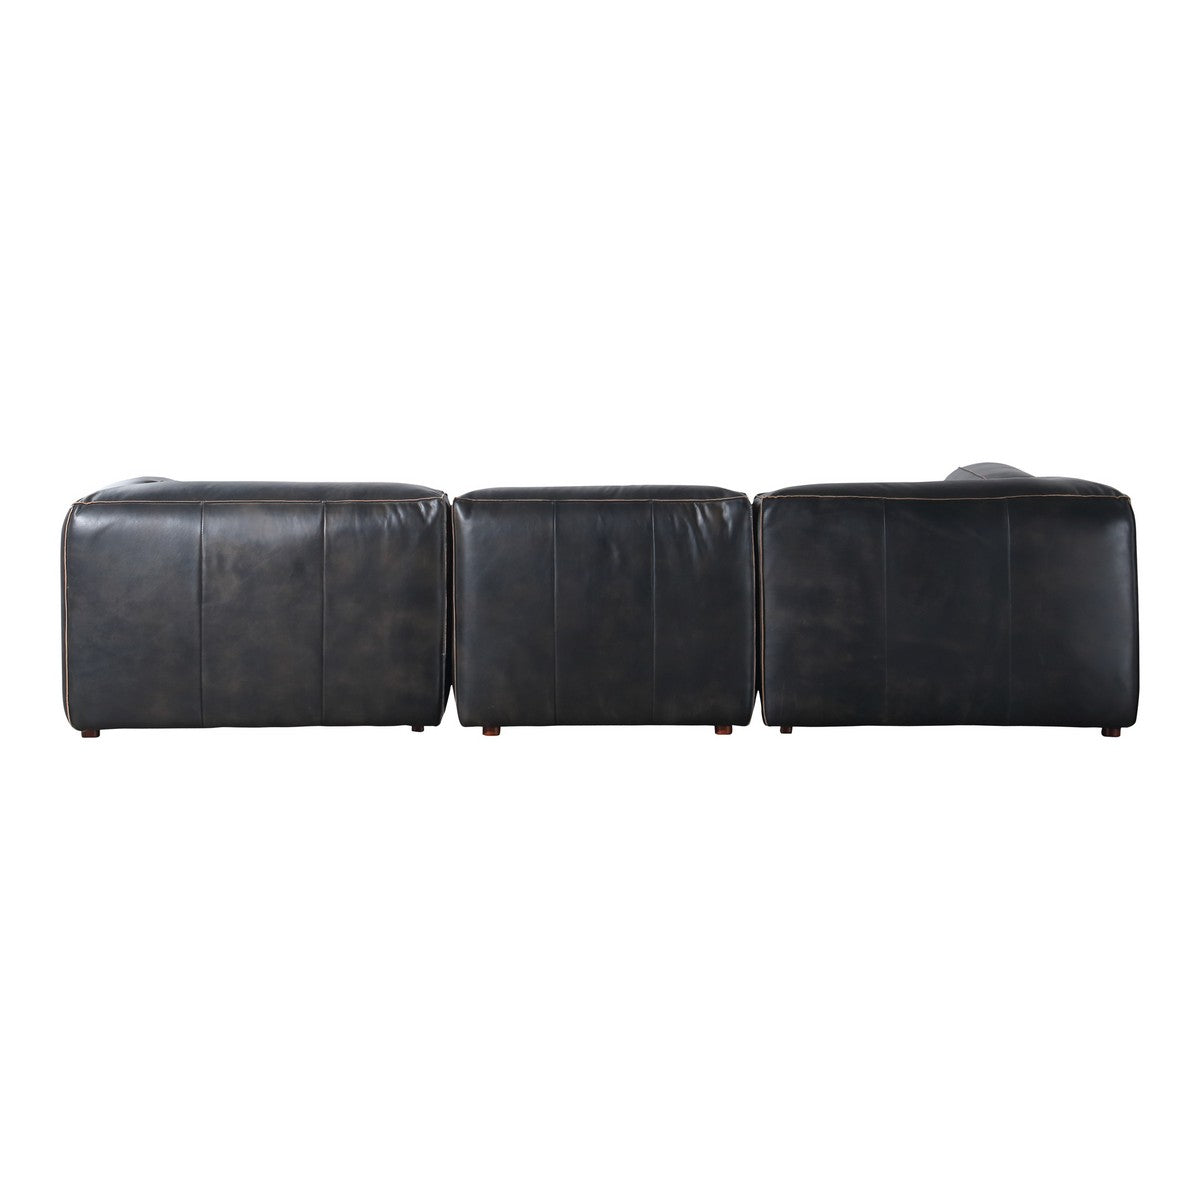 Moe's Home Collection Luxe Lounge Modular Sectional Antique Black - QN-1023-01